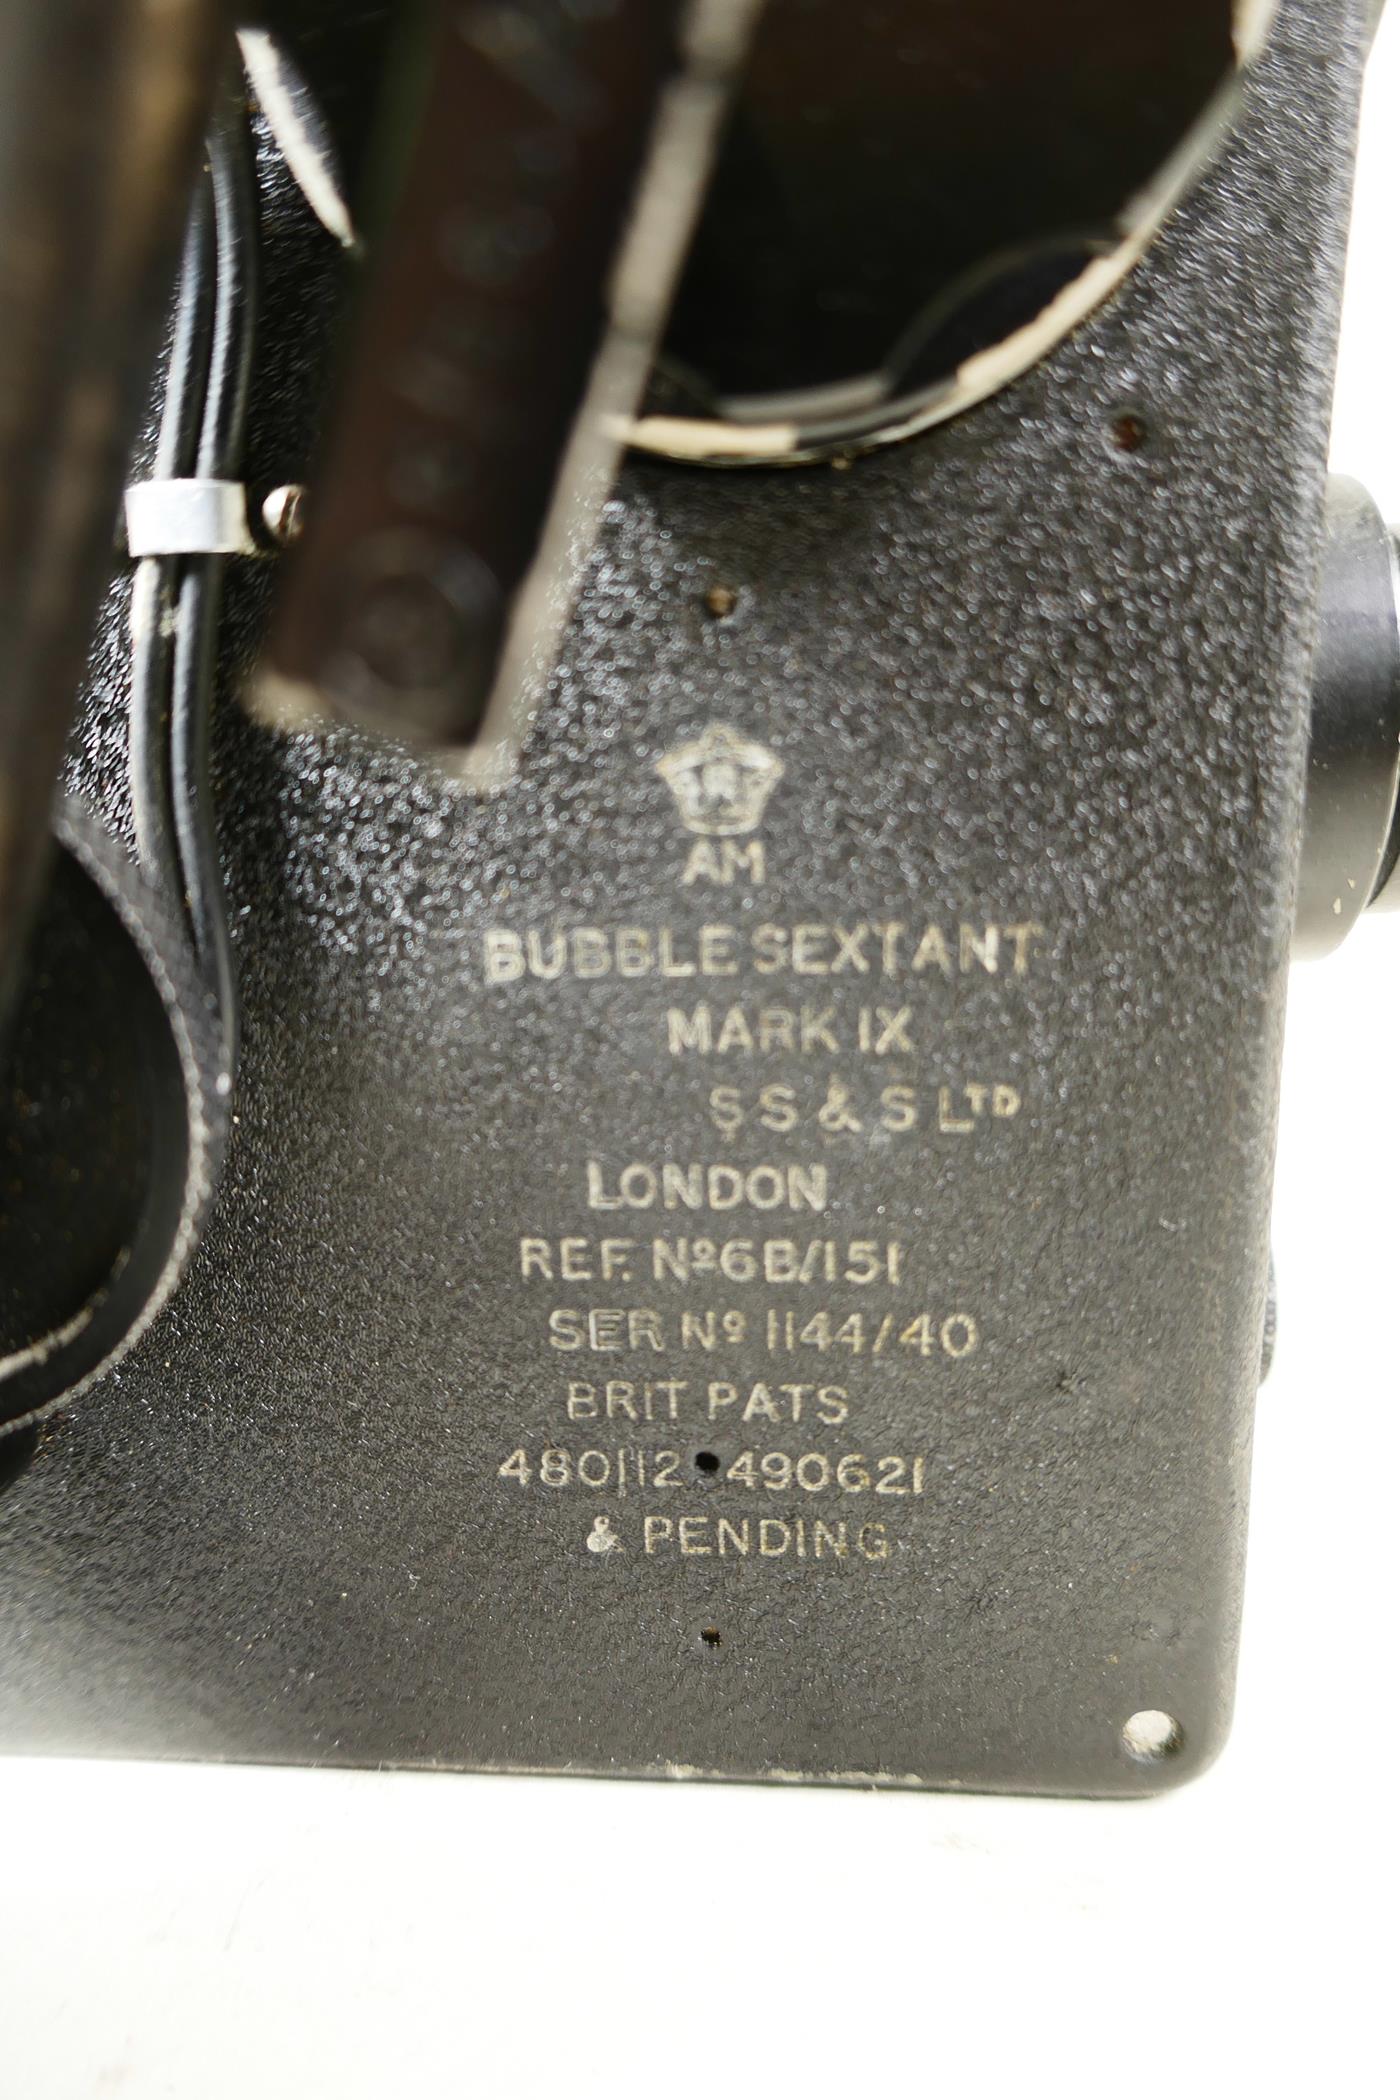 A WWII military aircraft bubble sextant mark 1x by S.S.&S. Ltd, London, ref no. 6B/151, serial no, - Image 3 of 7